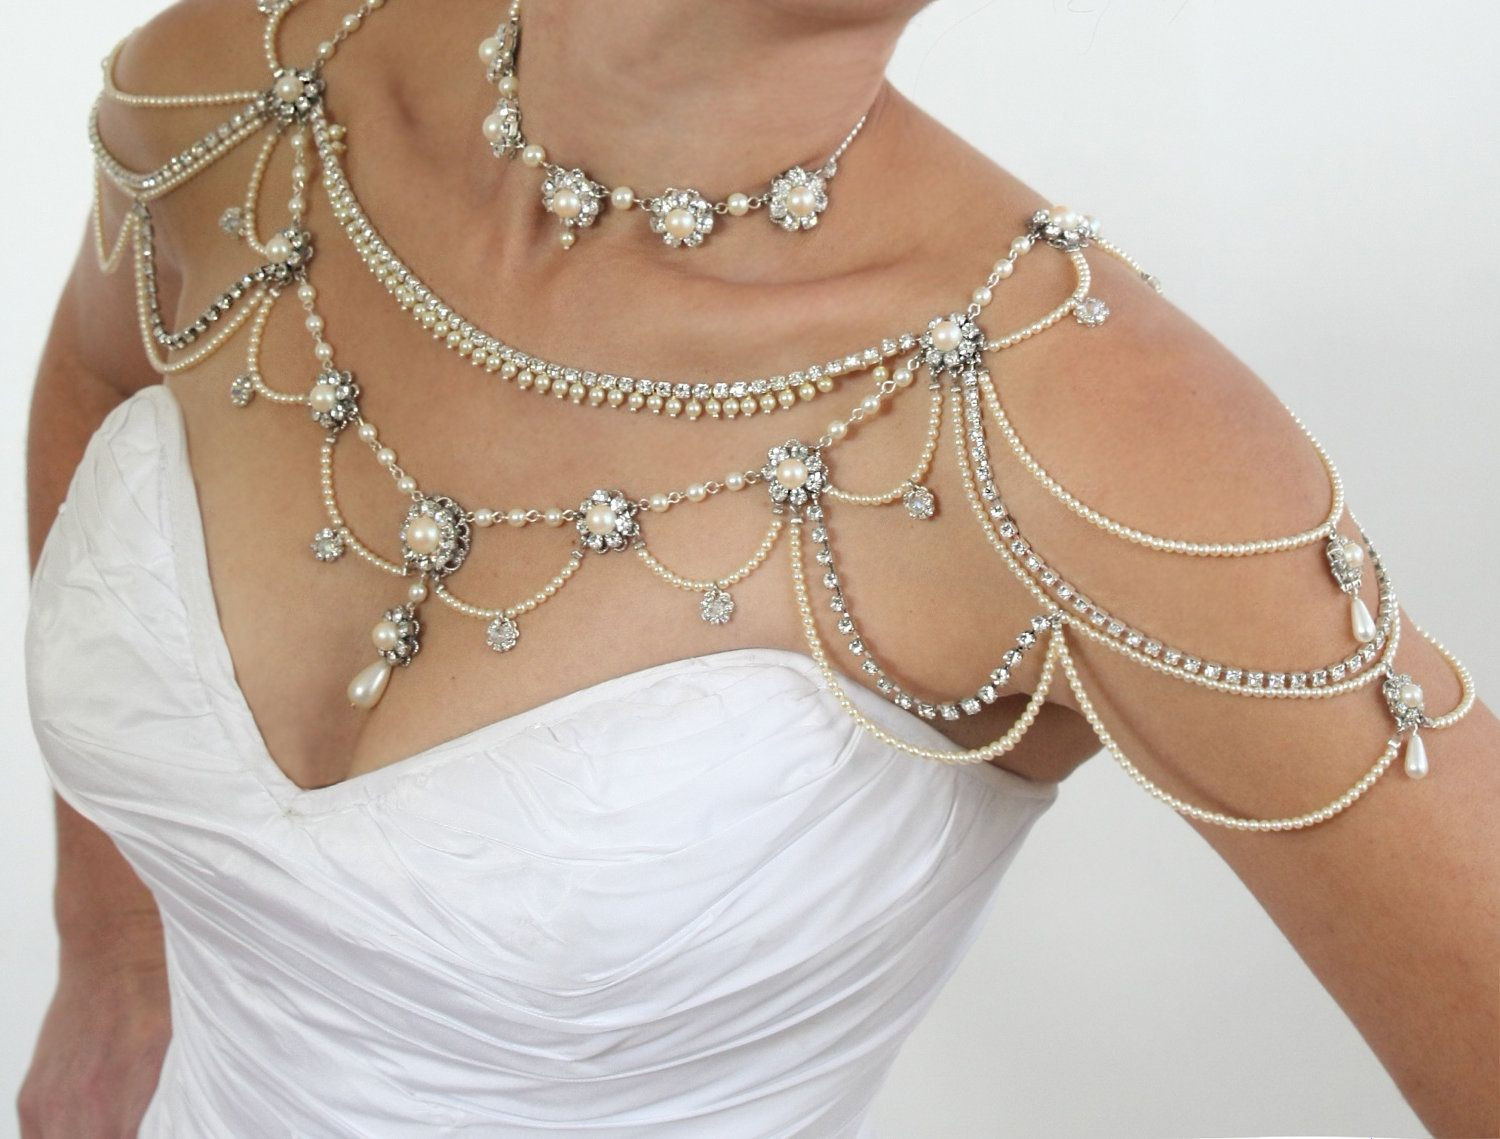 Bridal Body Jewelry
 Bridal Necklace For The SHOULDERS Victorian Style Beaded